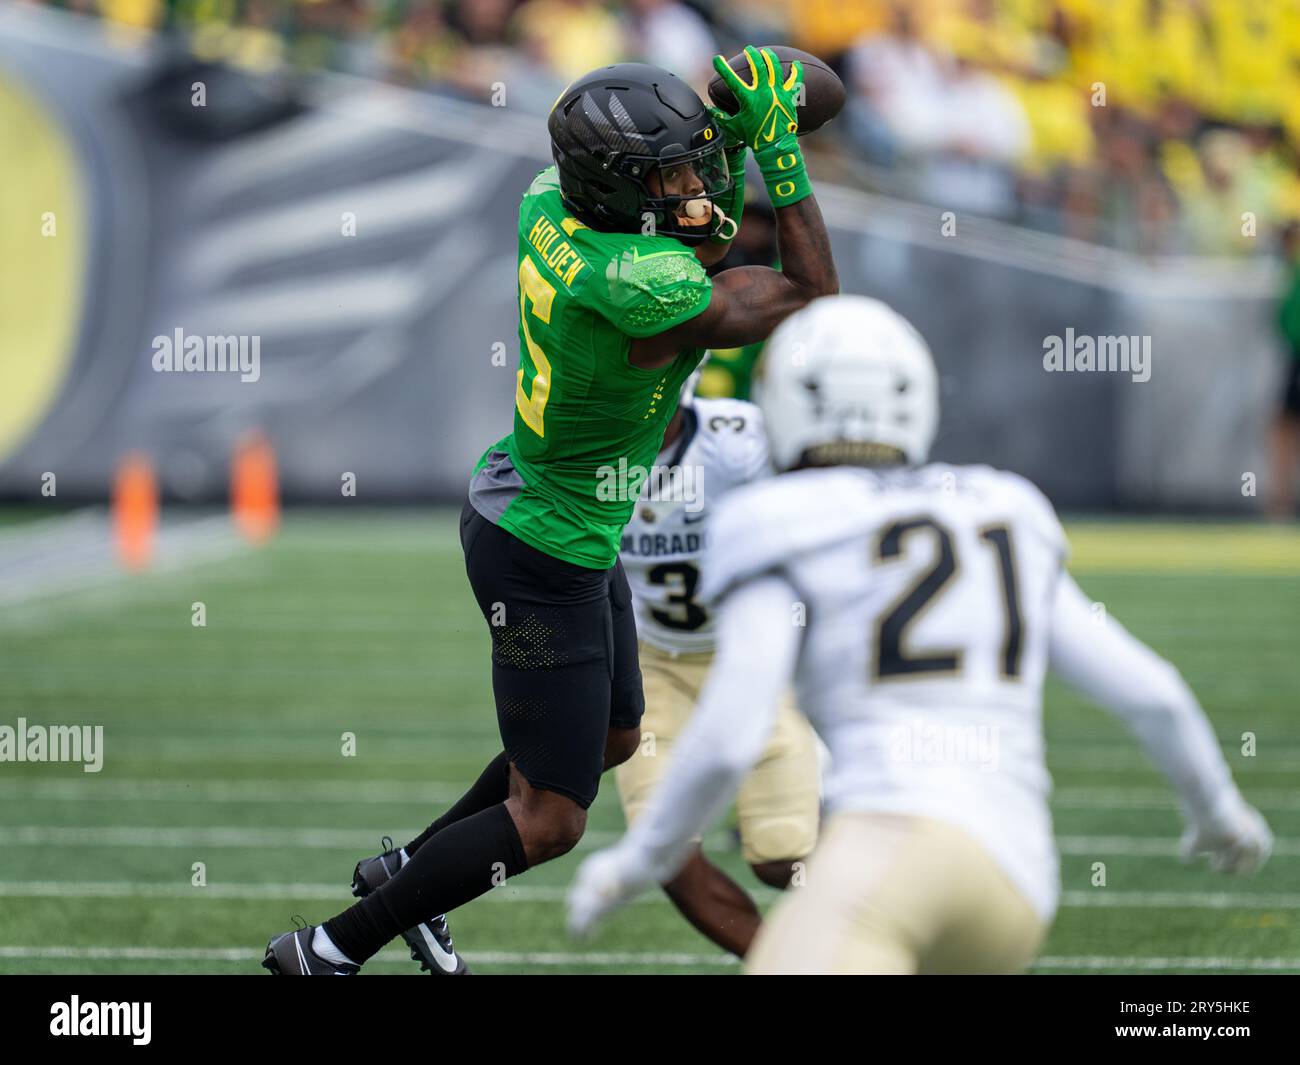 Oregon Ducks wide receiver Traeshon Holden (5) catches a pass while  Colorado Buffaloes safety Shilo Sanders (21) attempts to tackle him during  a NCAA Stock Photo - Alamy